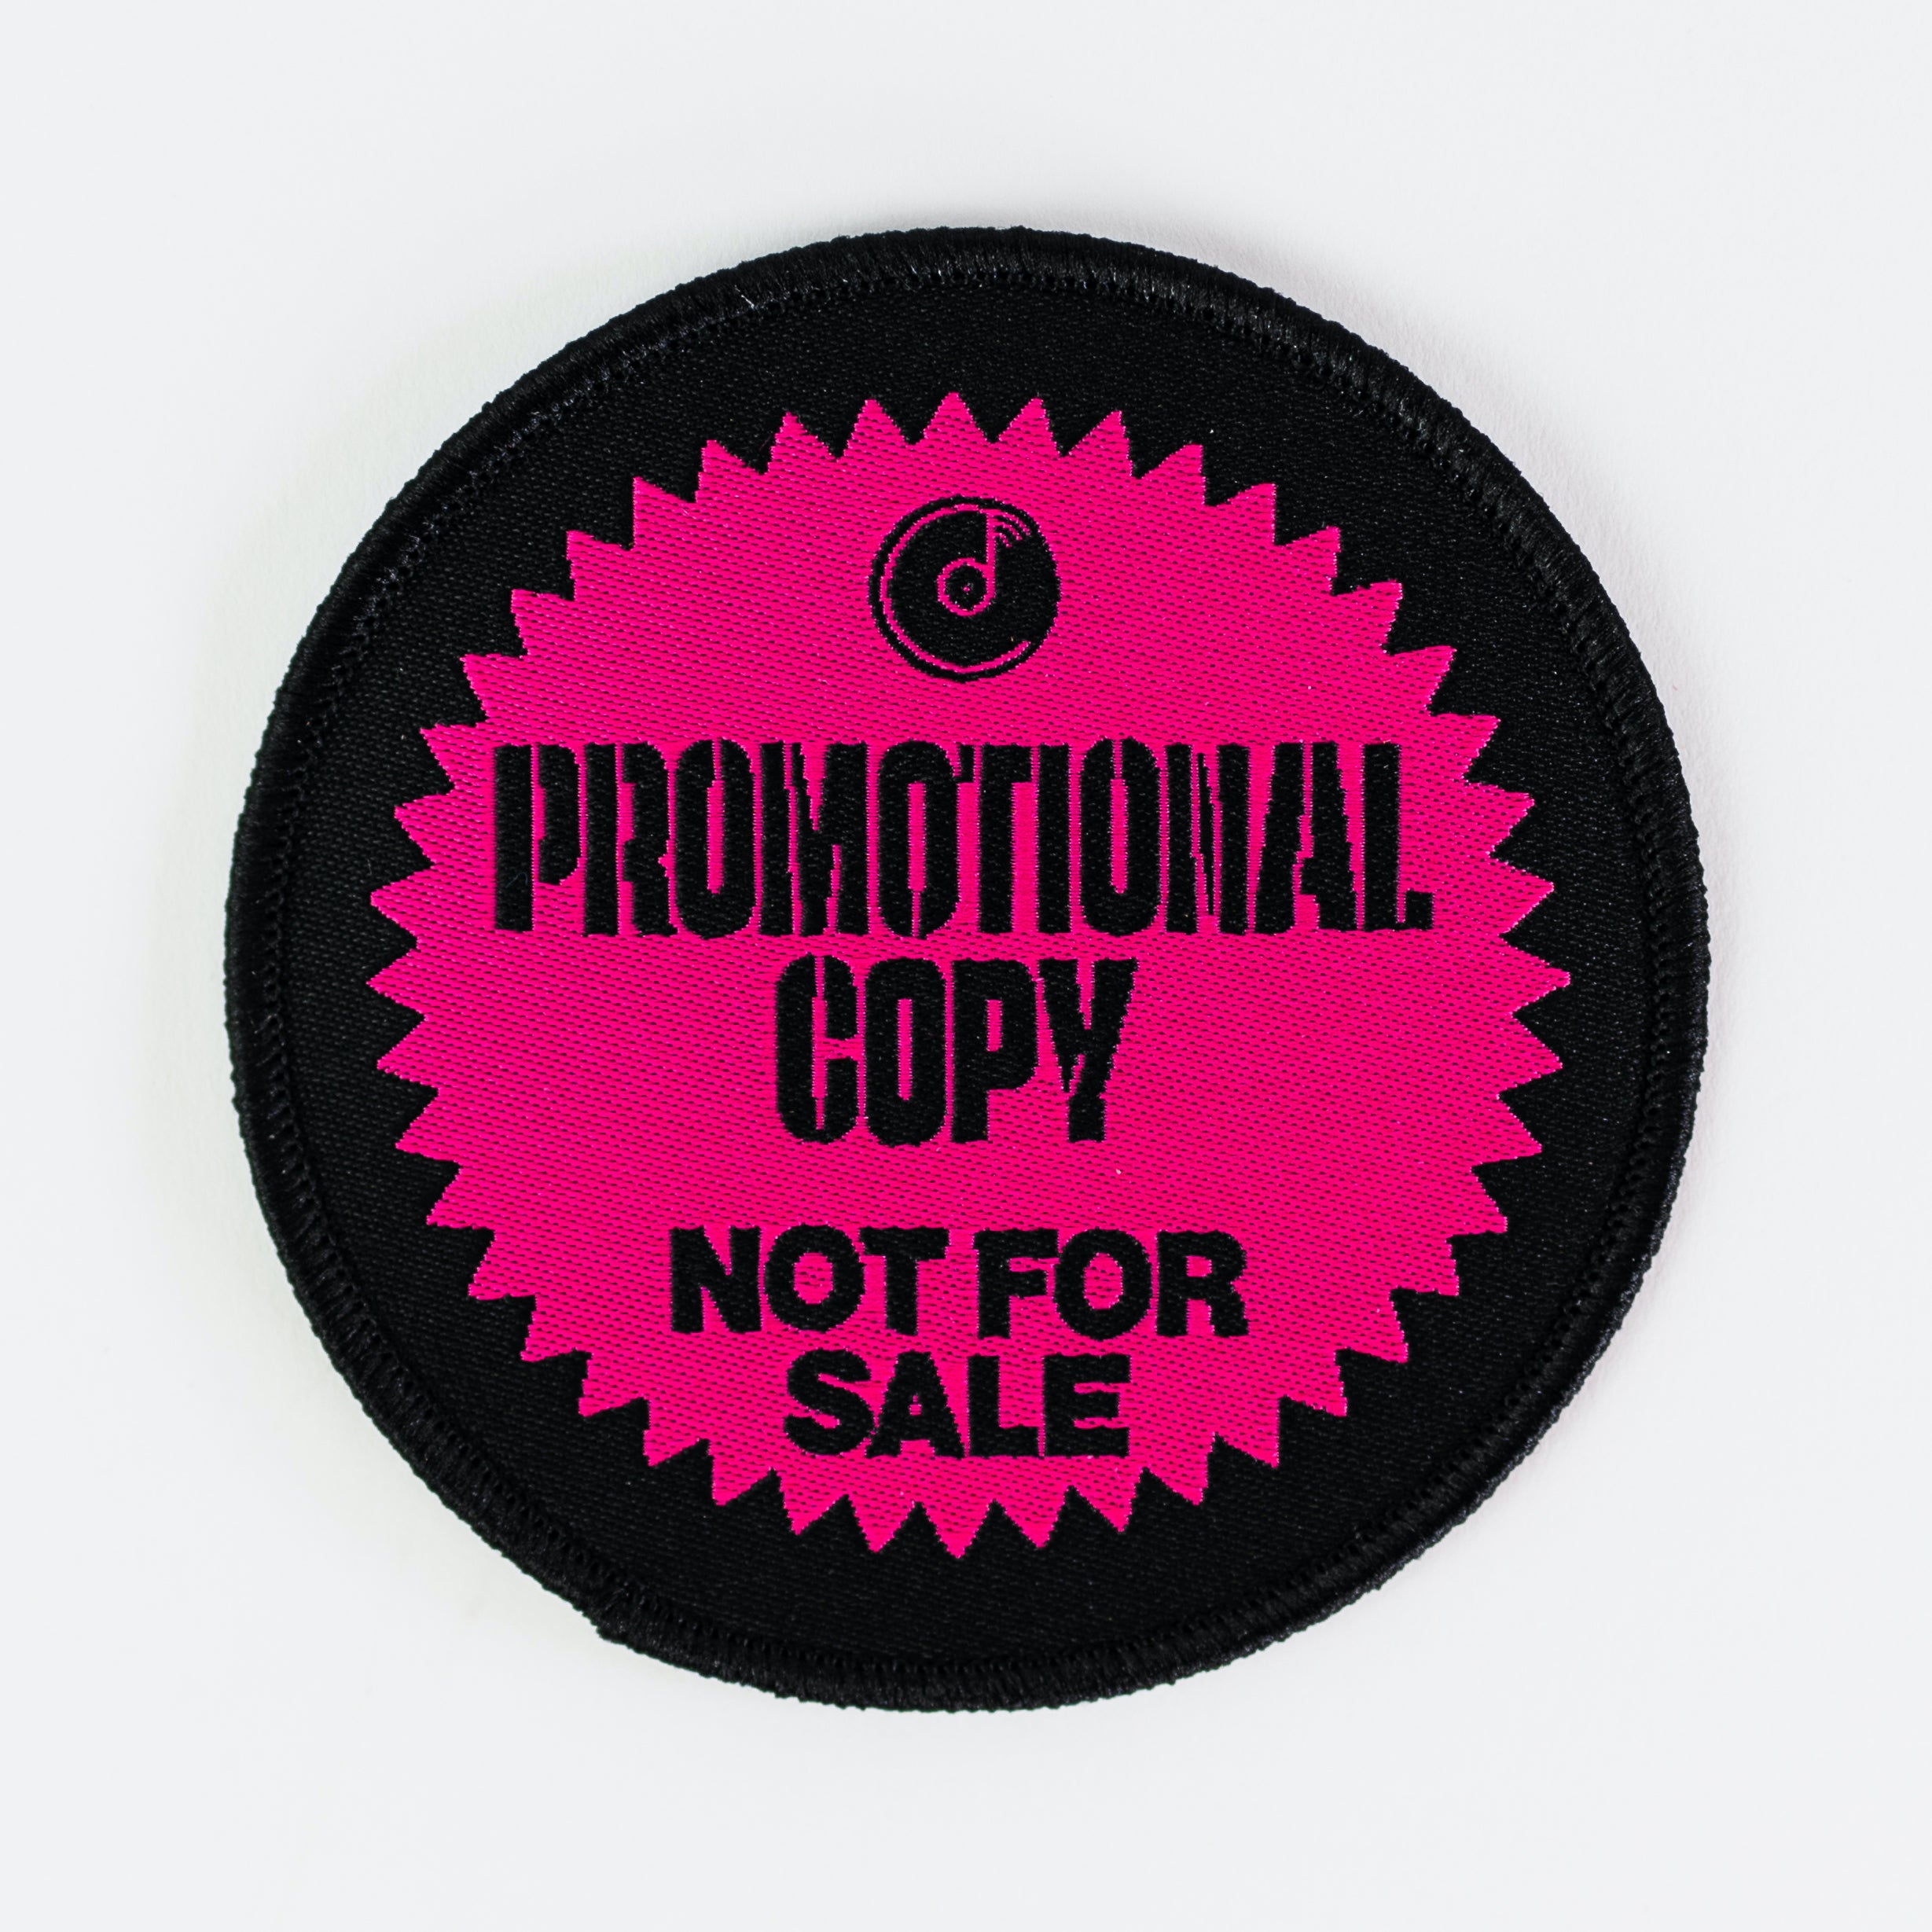 Pomotional Copy Not For Sale - Patch